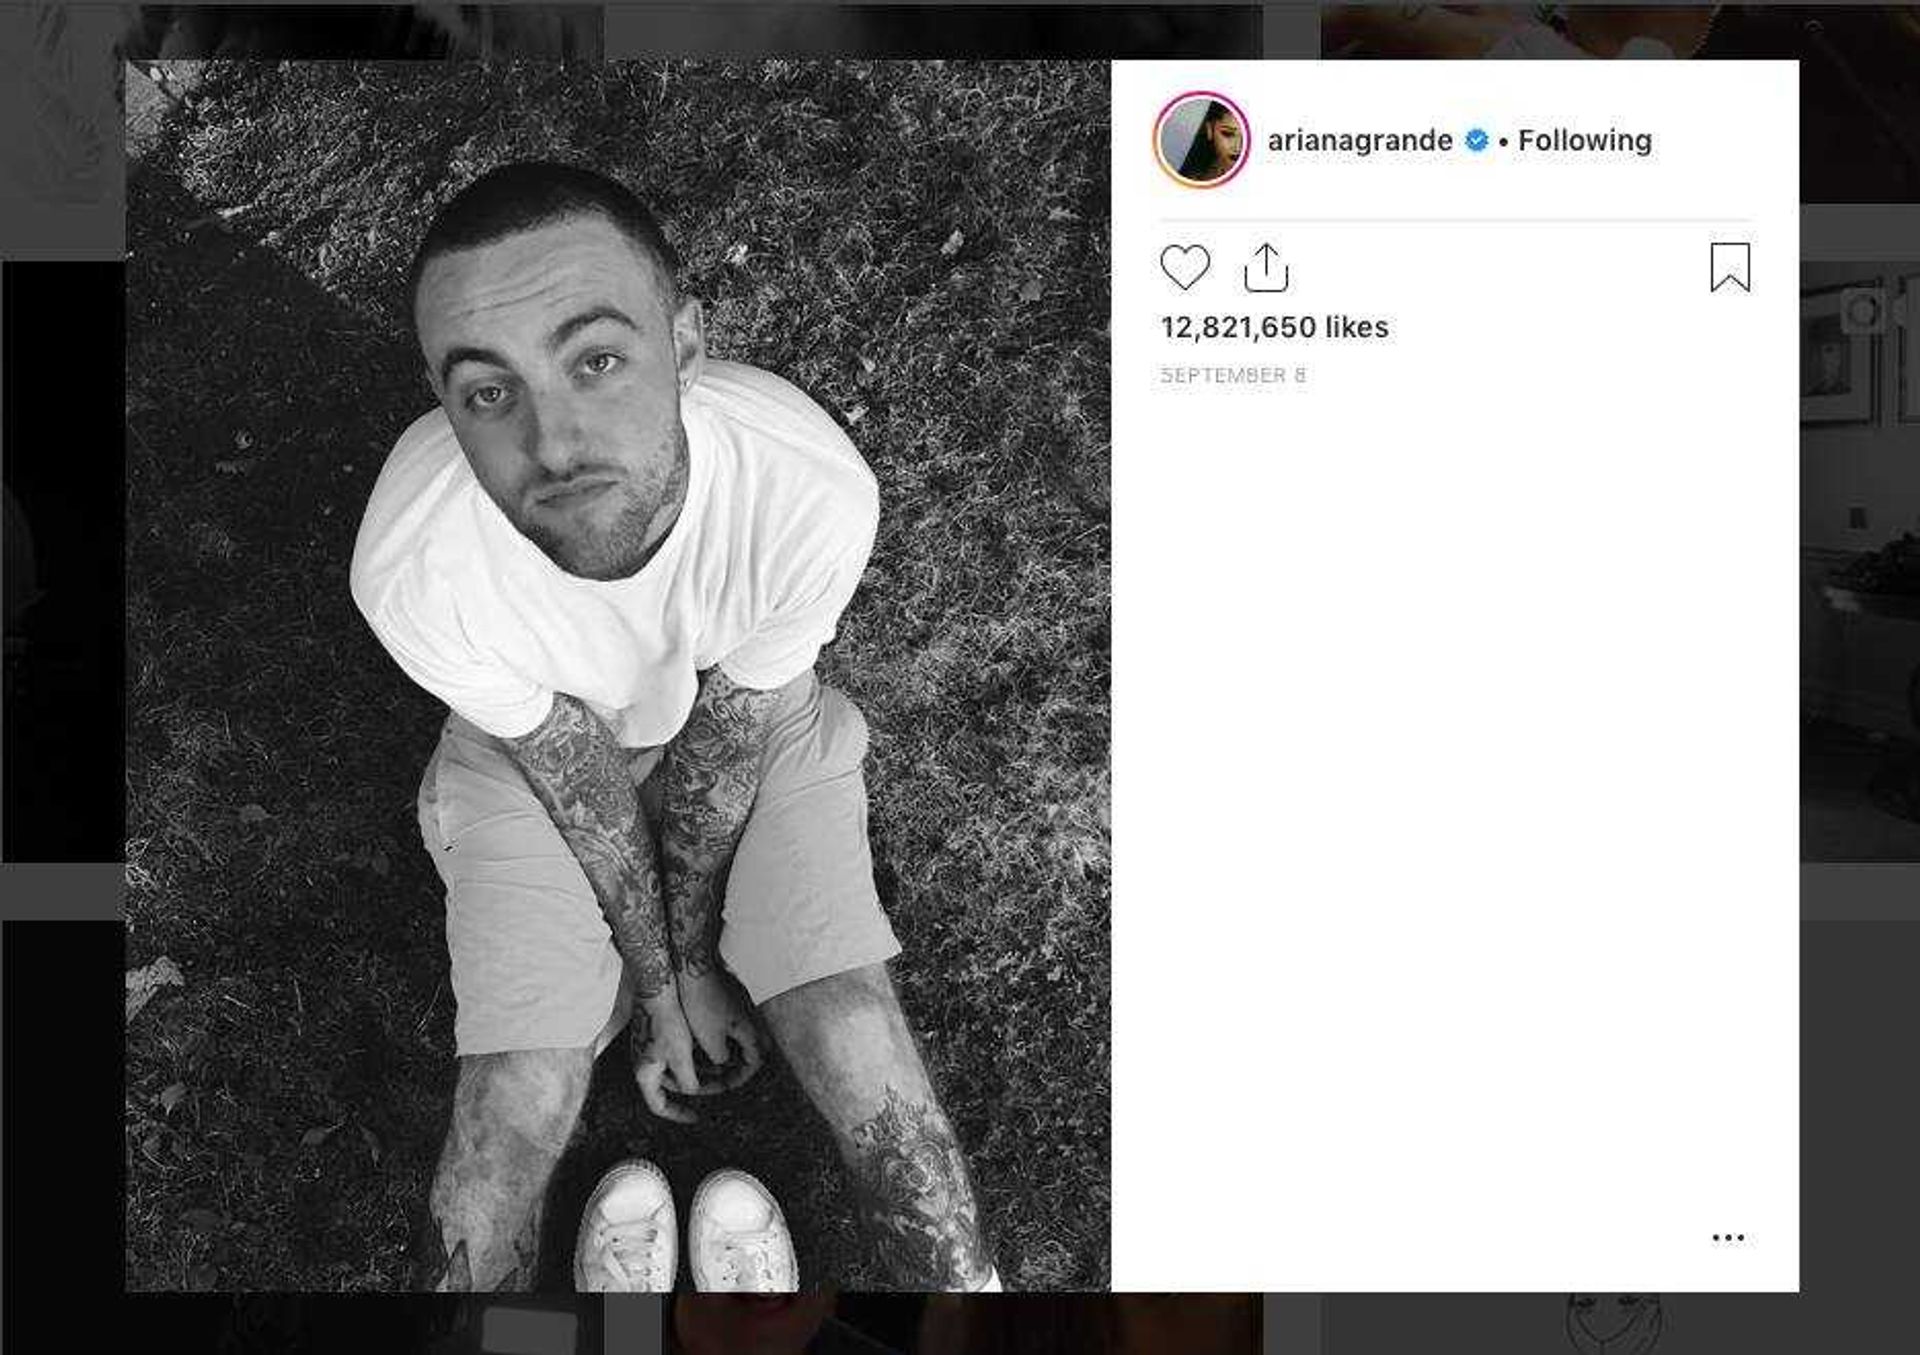 The post that broke Ariana Grande's silence after her late ex-boyfriend Mac Miller died of an accidental overdose in September.